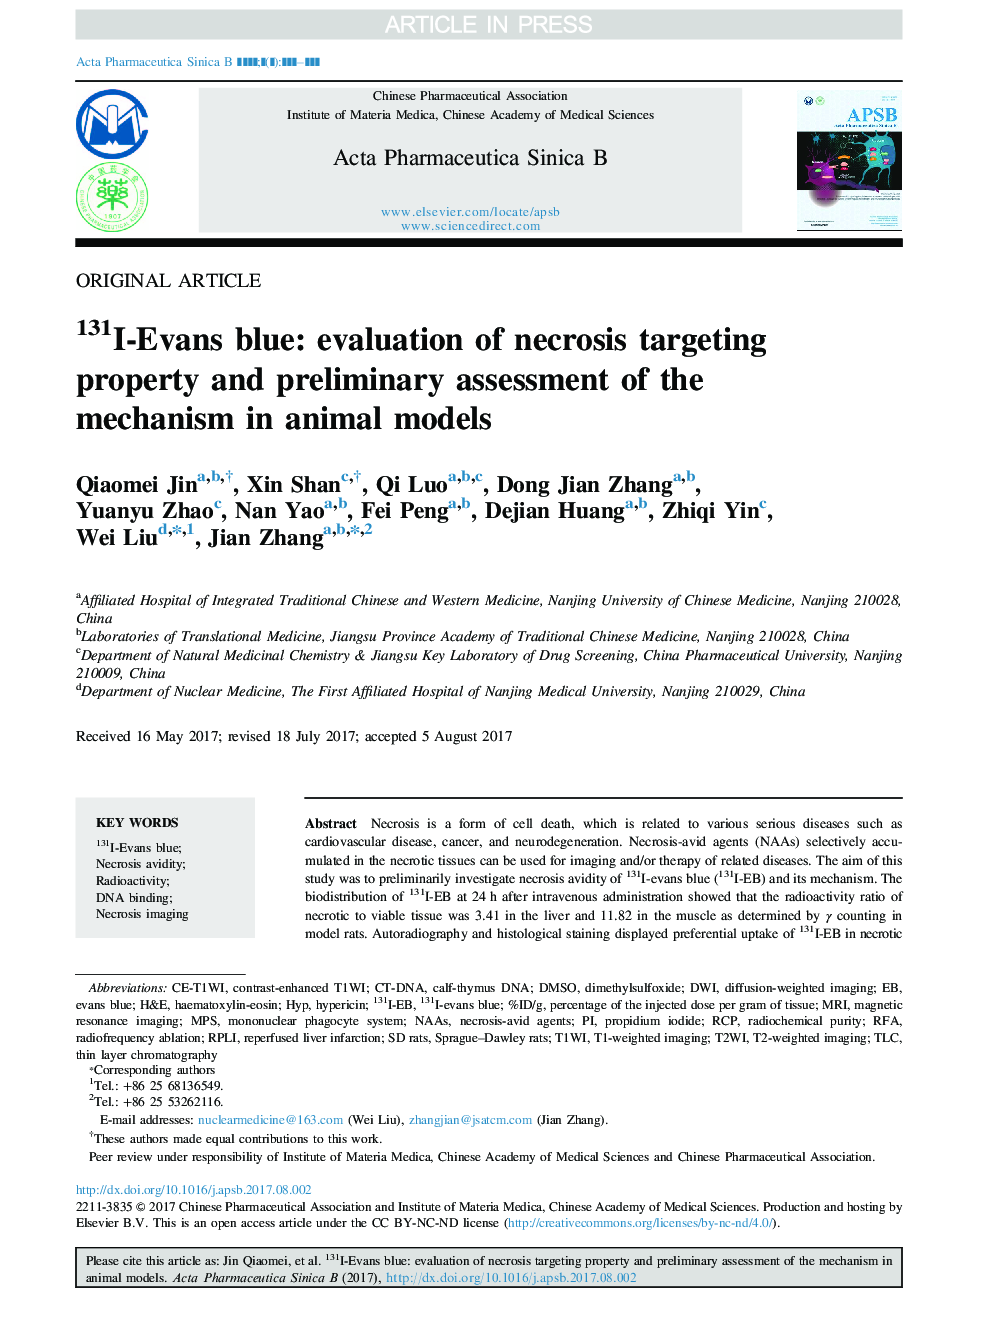 131I-Evans blue: evaluation of necrosis targeting property and preliminary assessment of the mechanism in animal models